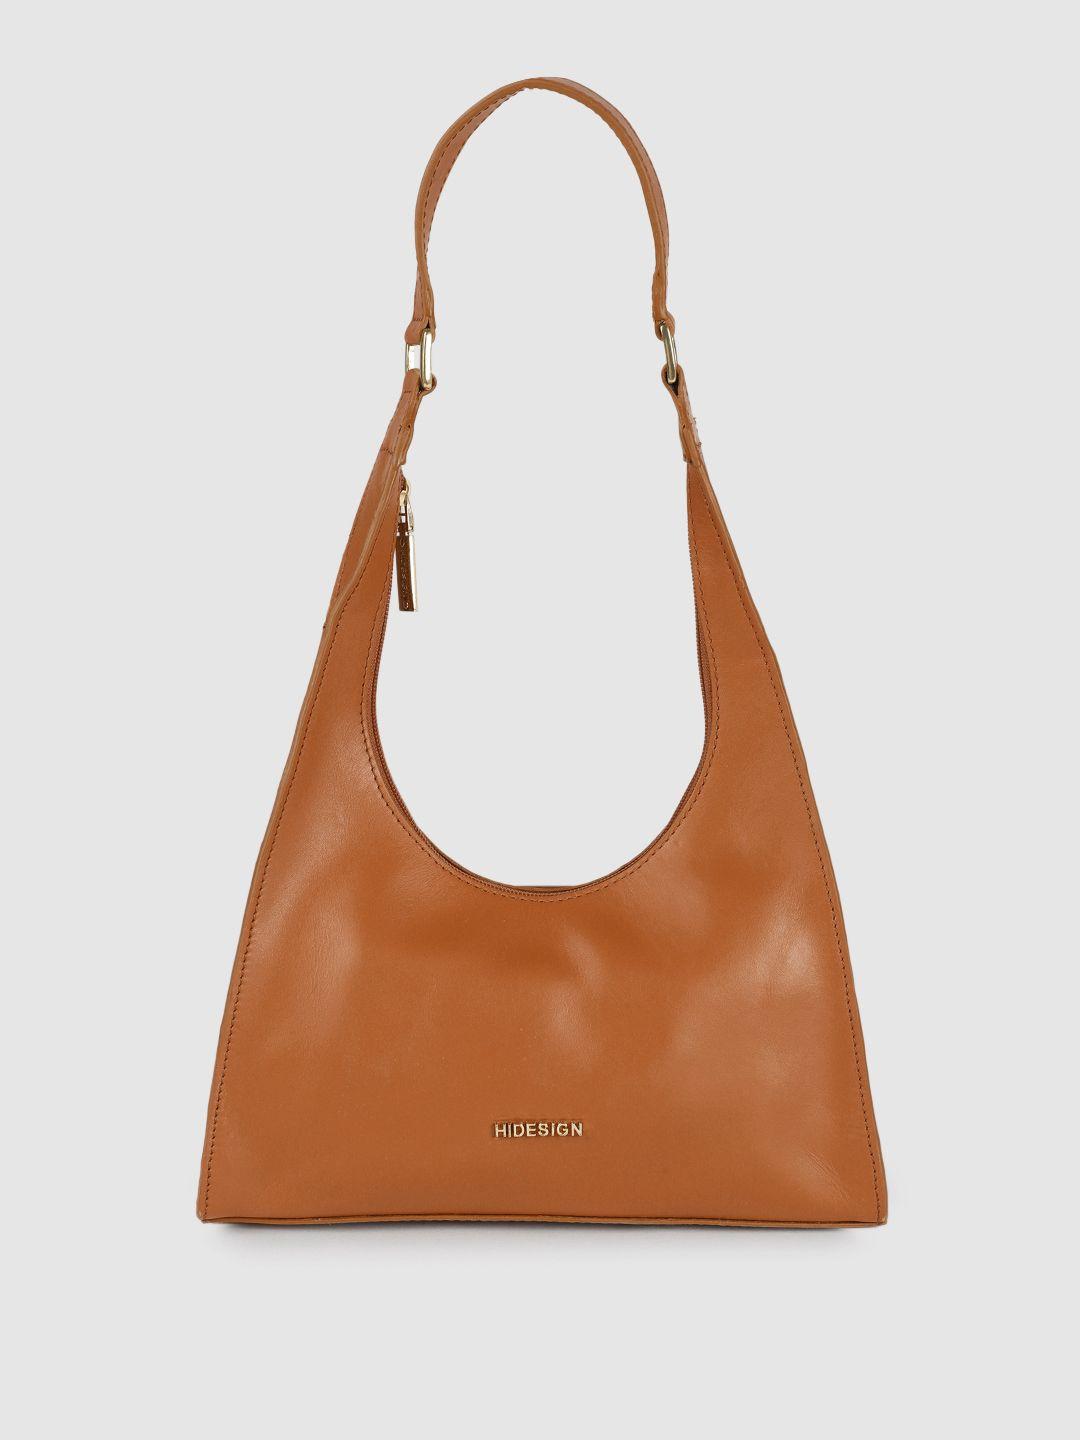 hidesign brown leather structured hobo bag